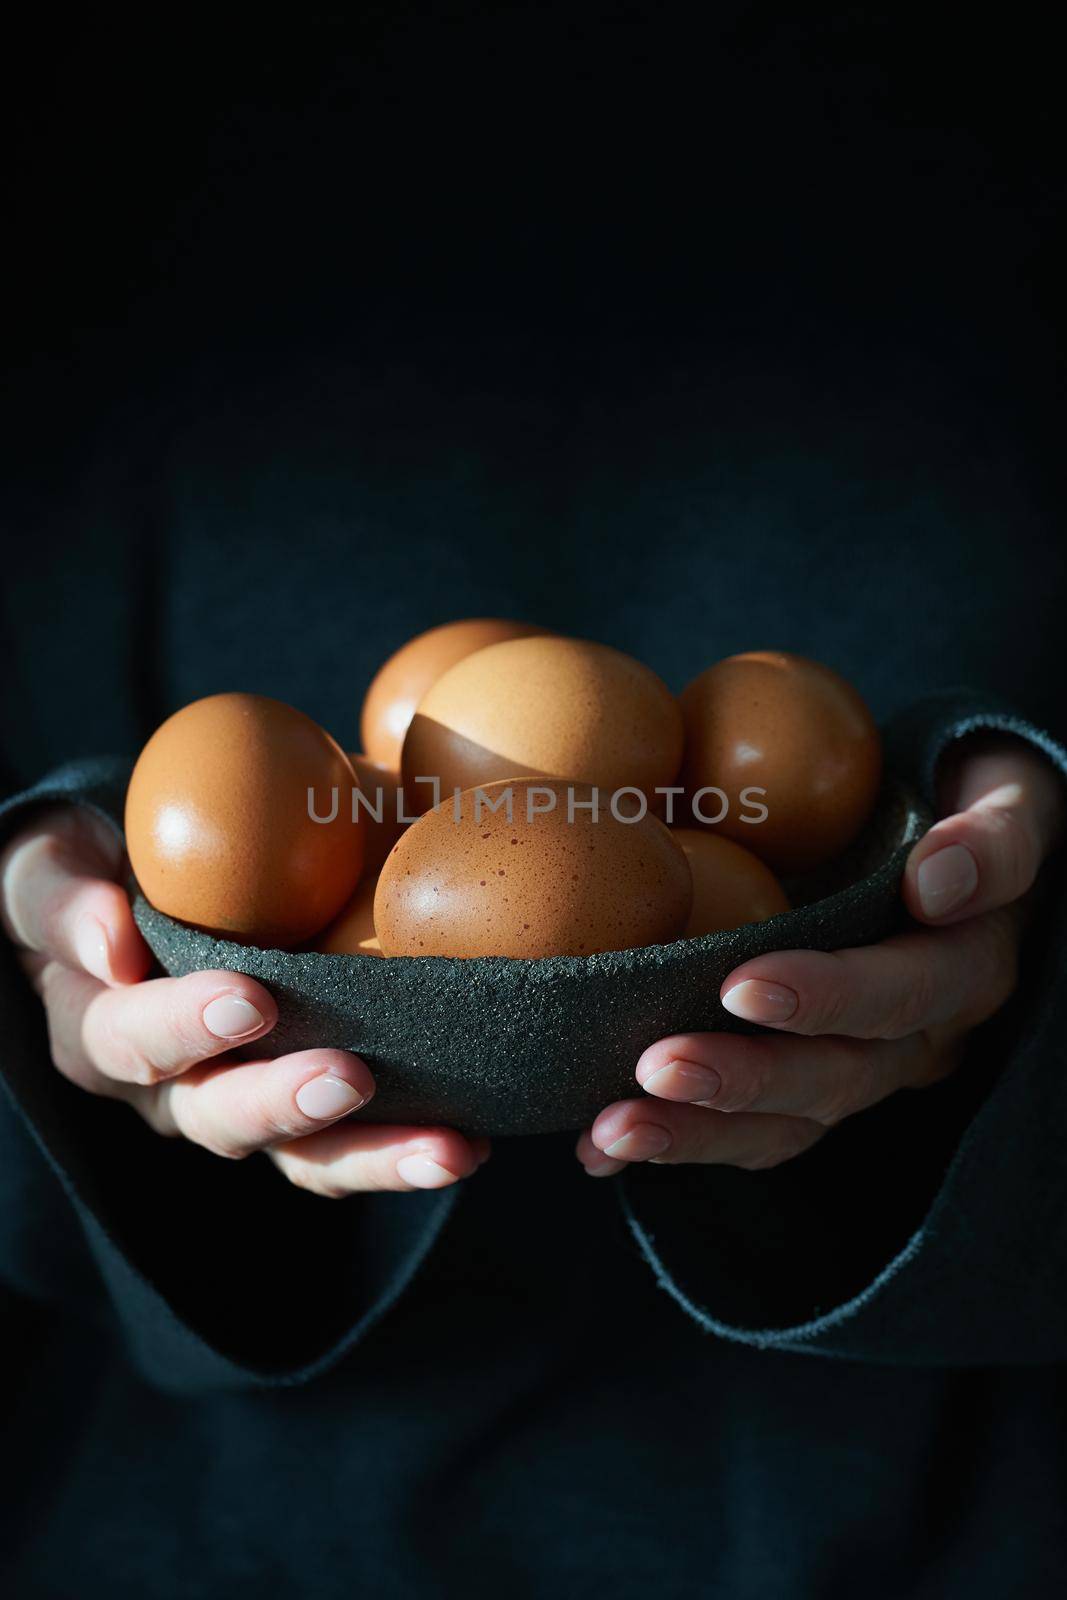 Unusual Easter on a dark background. A bowl of brown eggs with hands. Darkness, rays of sunlight shine on the eggs. The concept of a new life, rebirth. Rustic style. Vertical, copy space